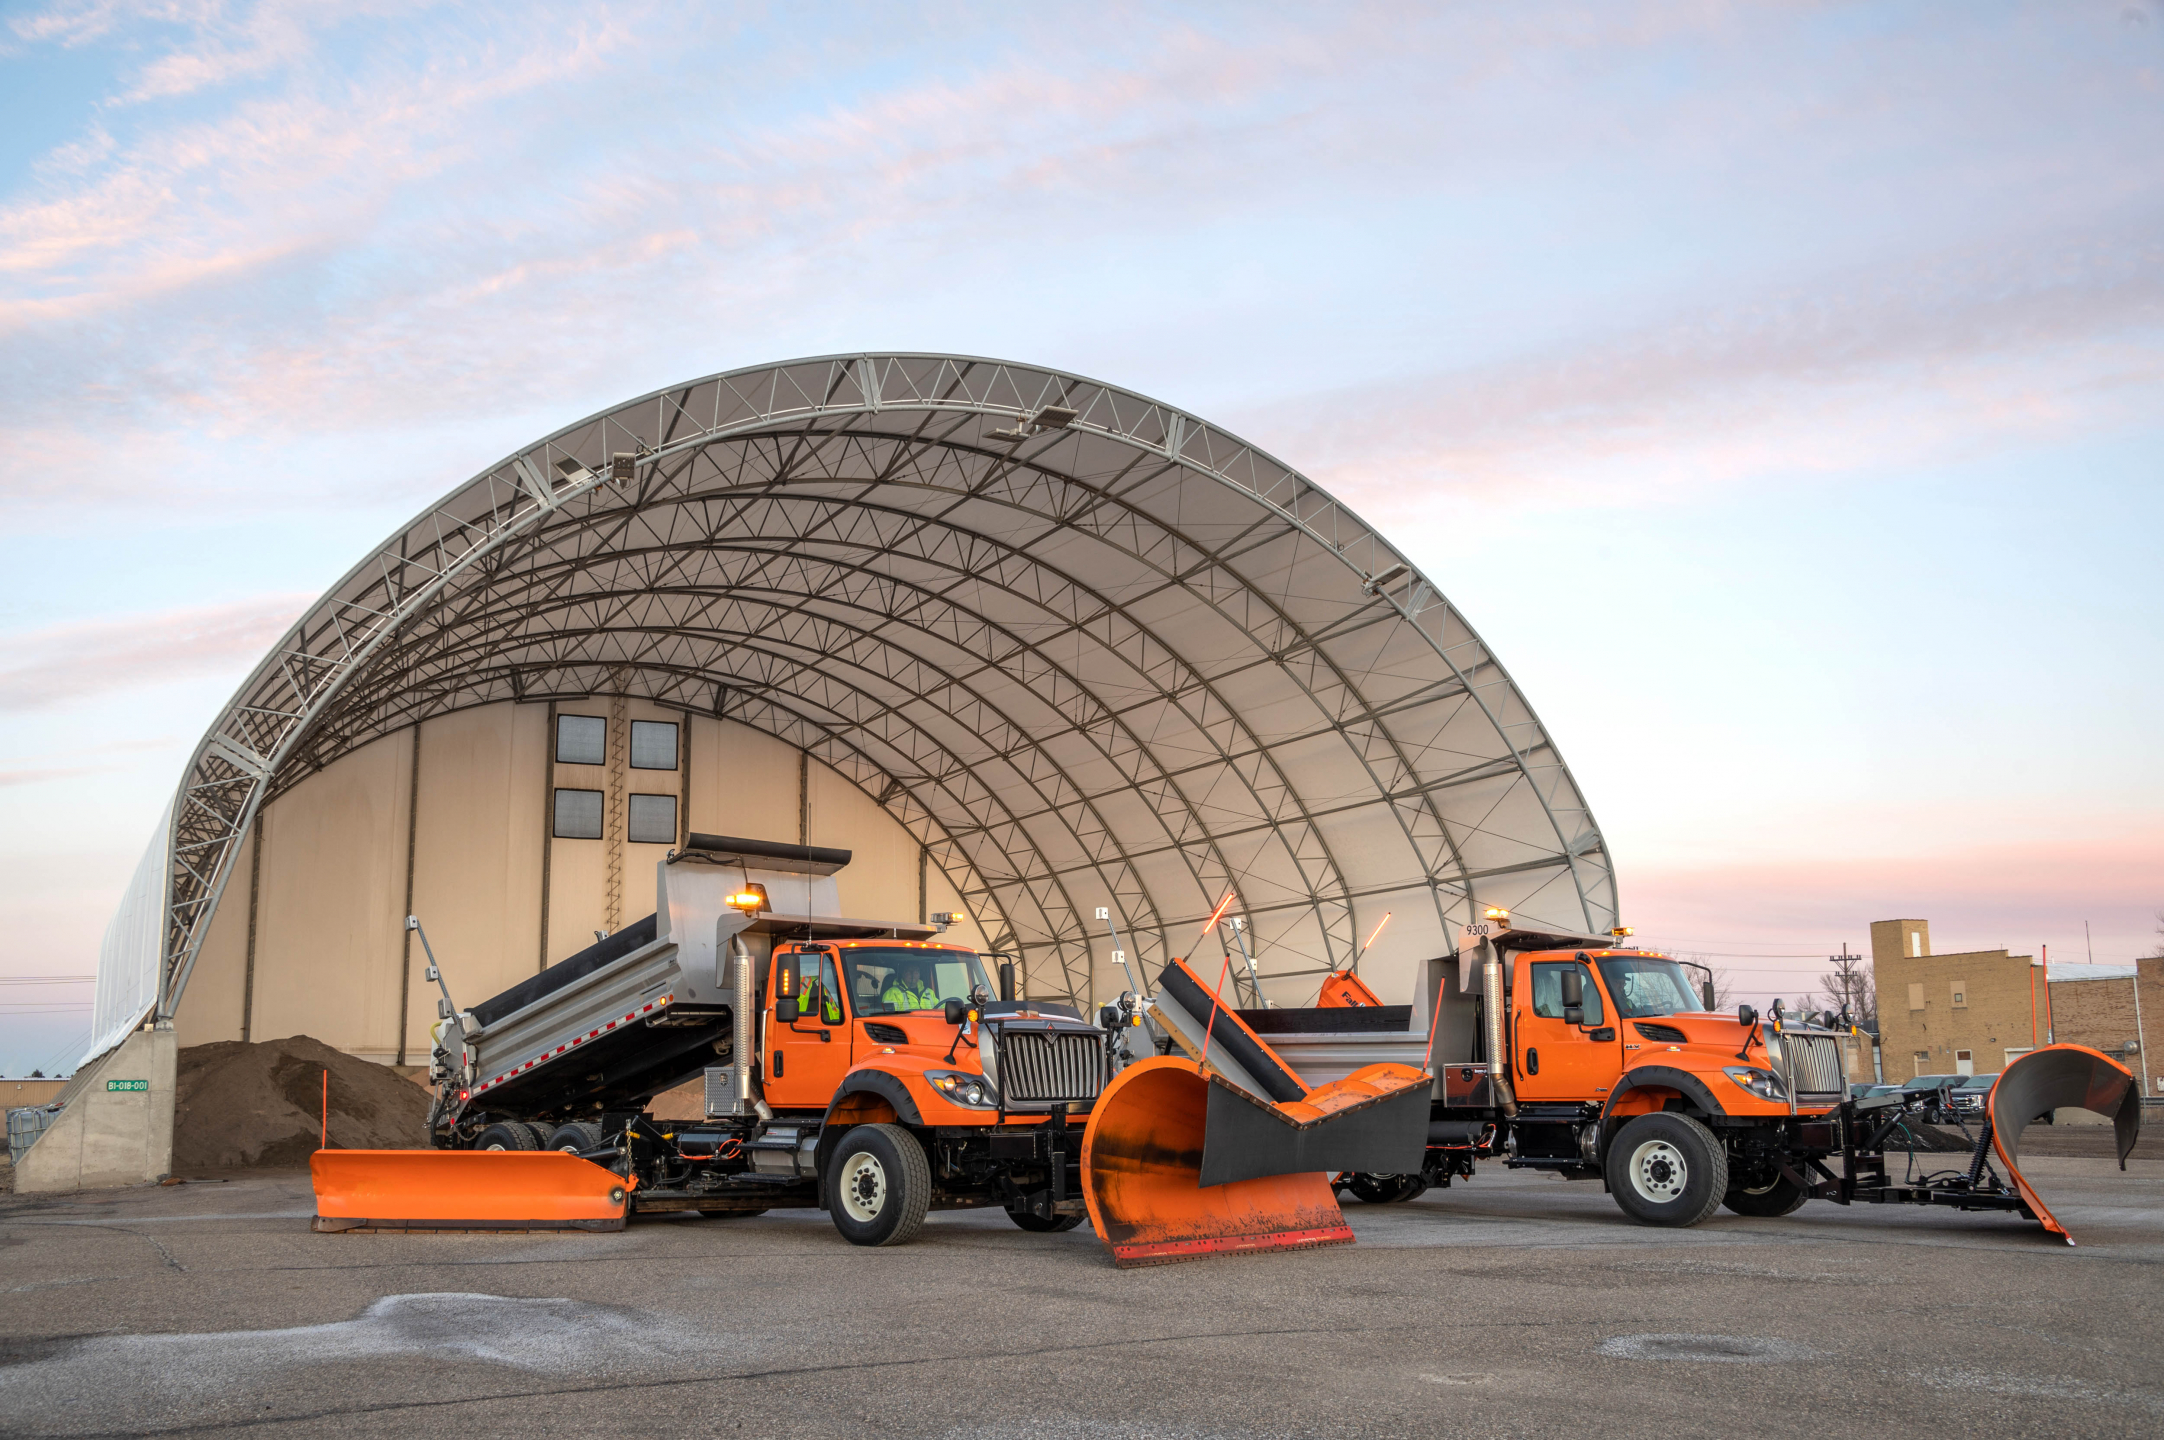 Snowplows sit in front of a stockpile of sand, salt, and other winter road necessities.